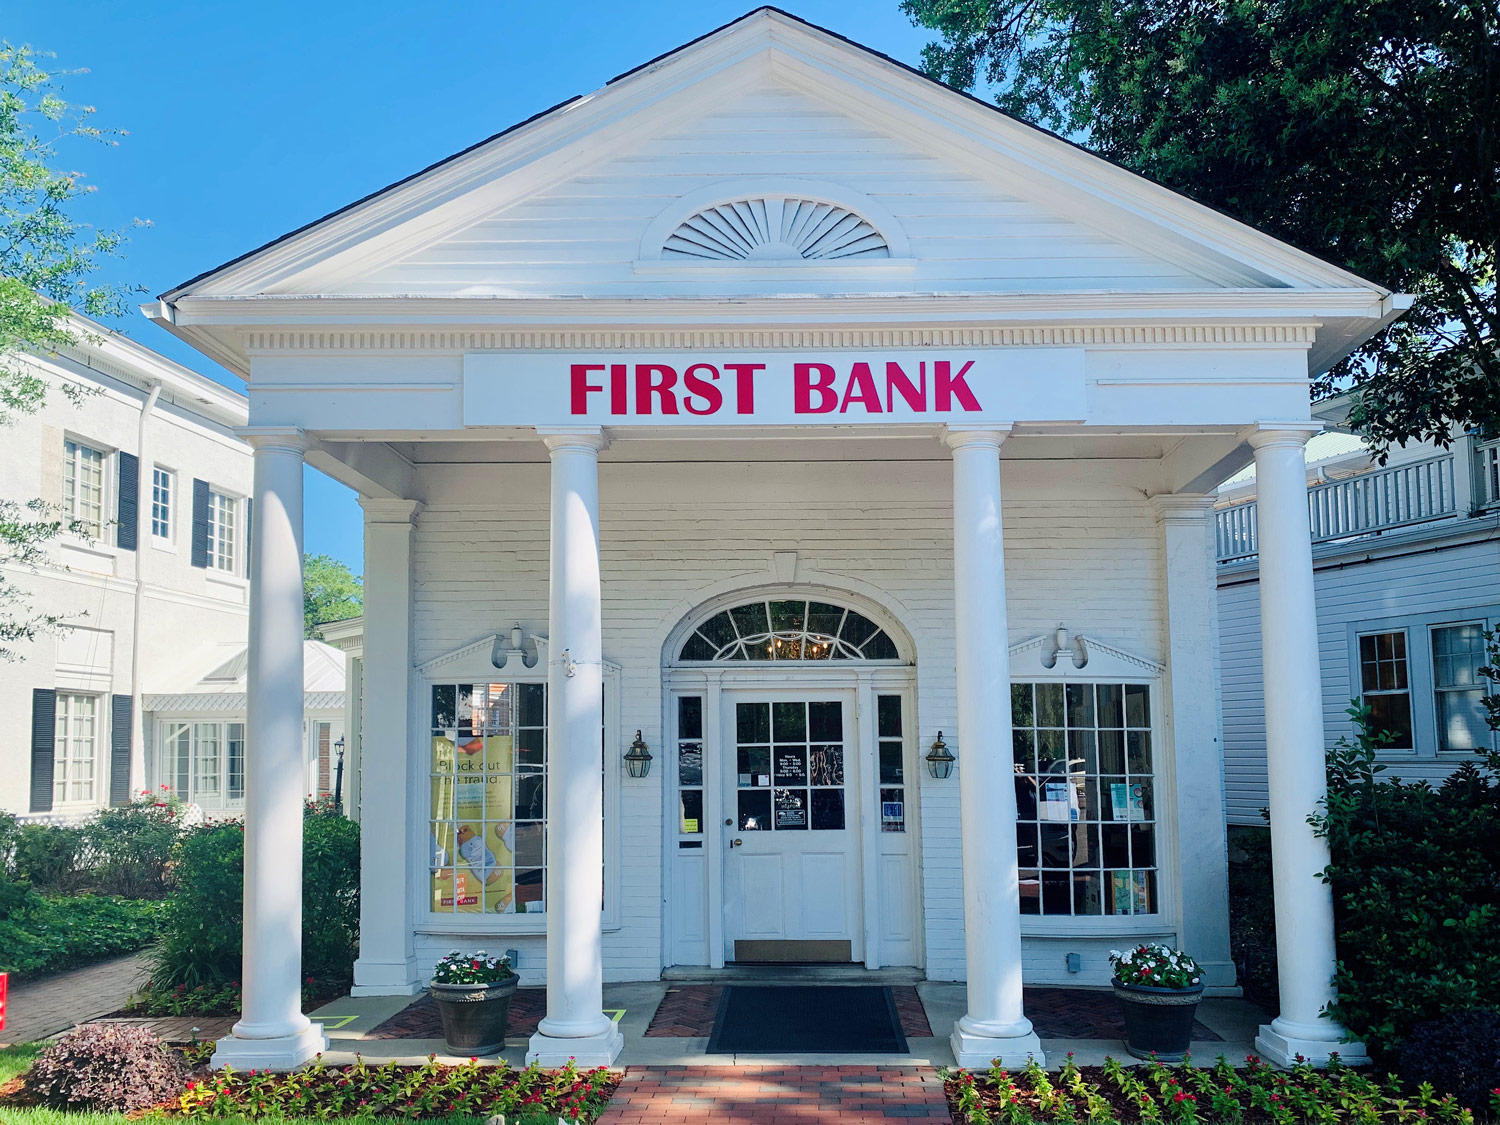 Come visit the First Bank Pinehurst Village branch on Chinquapin Road. Your local team will provide expert financial advice, flexible rates, business solutions, and convenient mobile options.